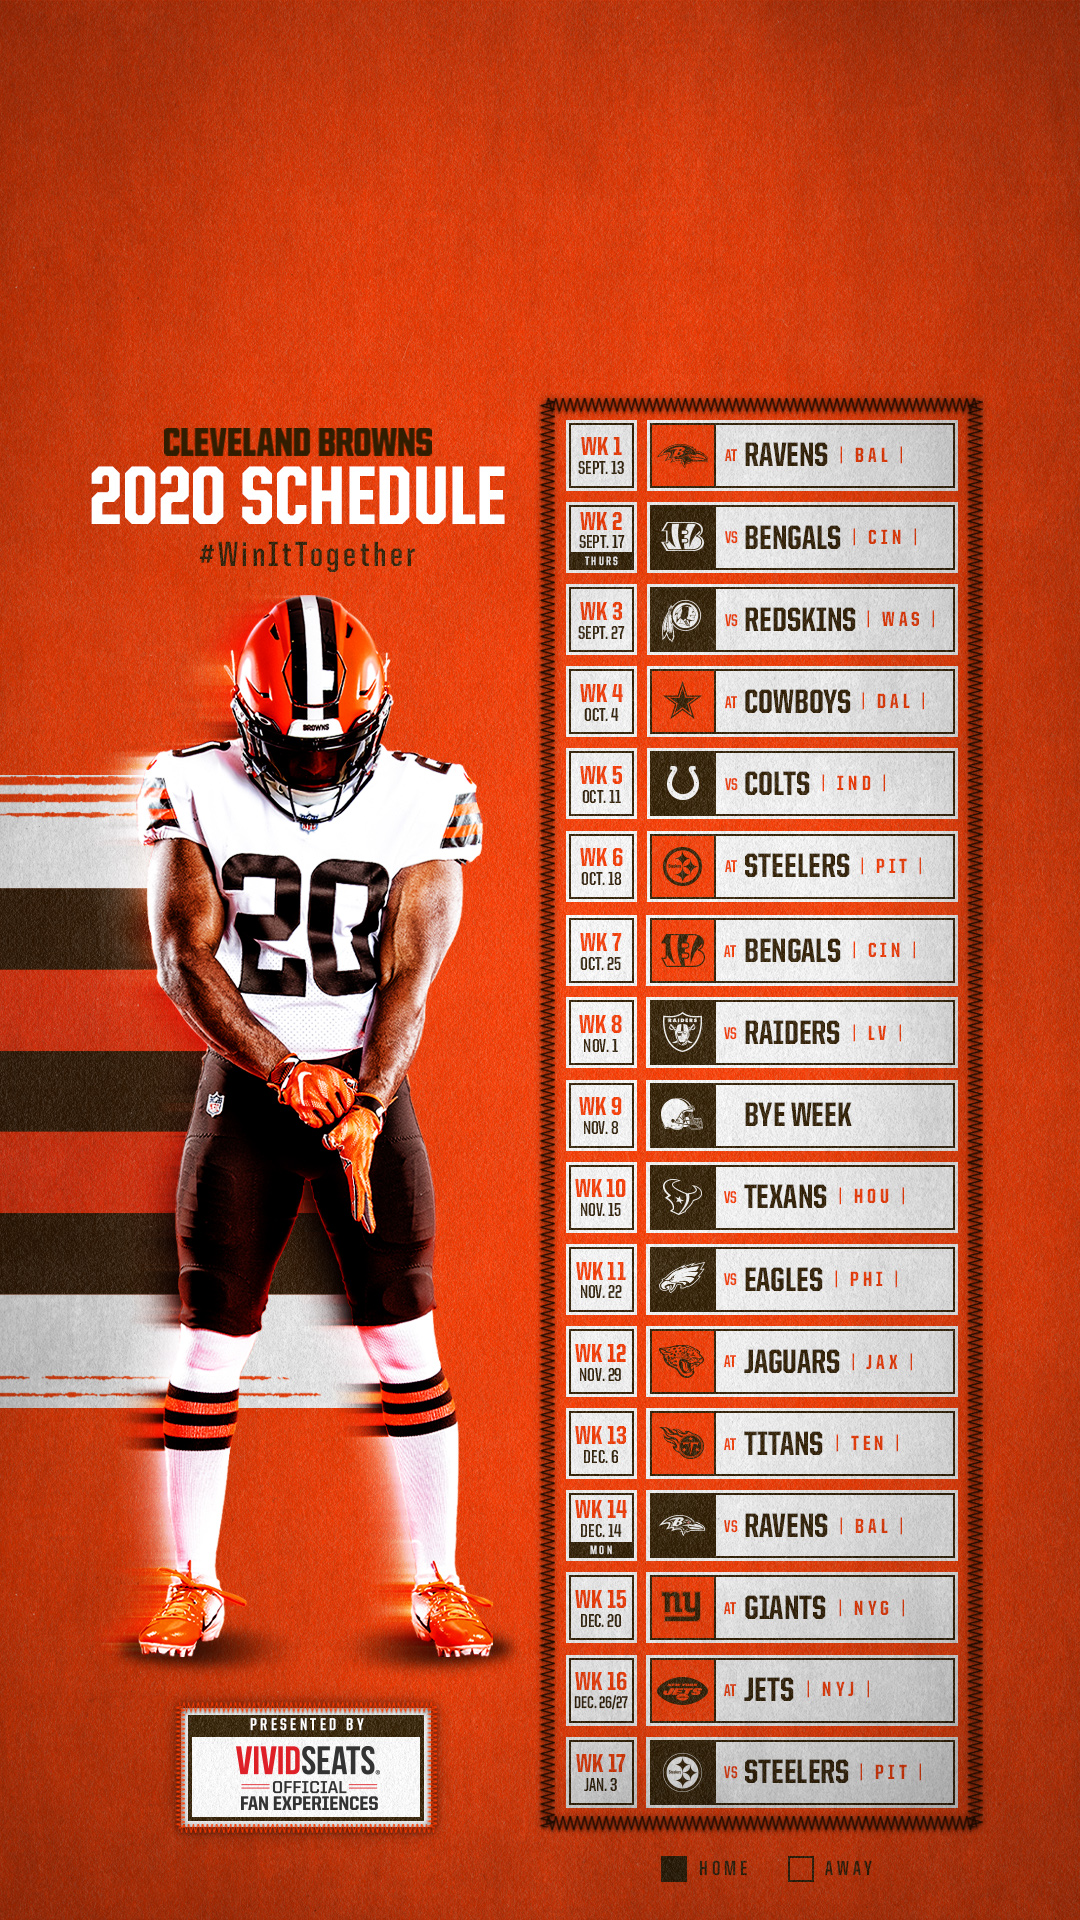 Cleveland Browns Phone Wallpapers  Wallpaper Cave